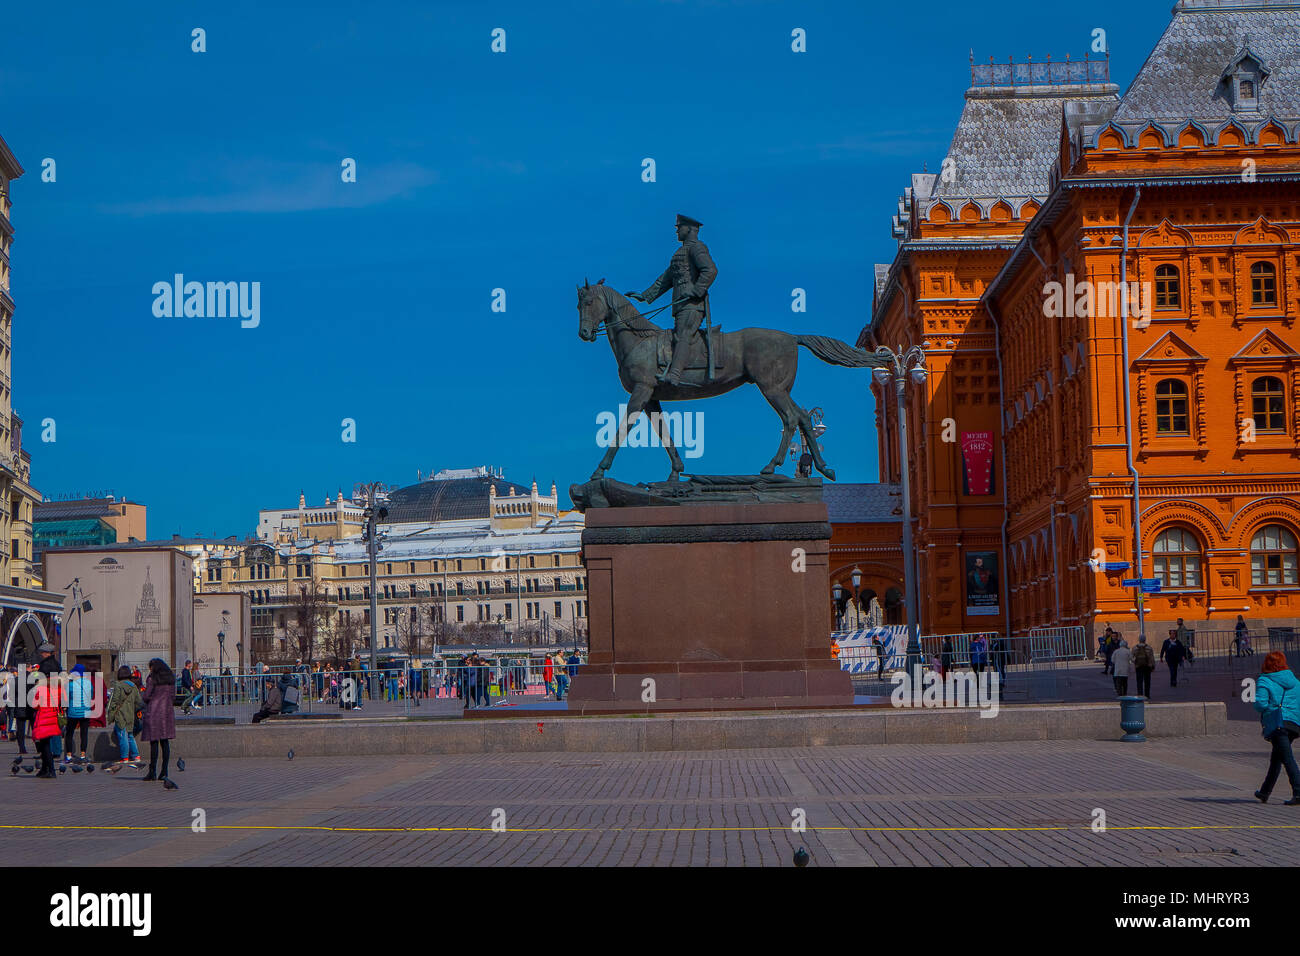 MOSCOW, RUSSIA- APRIL, 24, 2018: Monument of founder of Moscow Yuri Dolgorukiy at Tverskaya street in Moscow Stock Photo